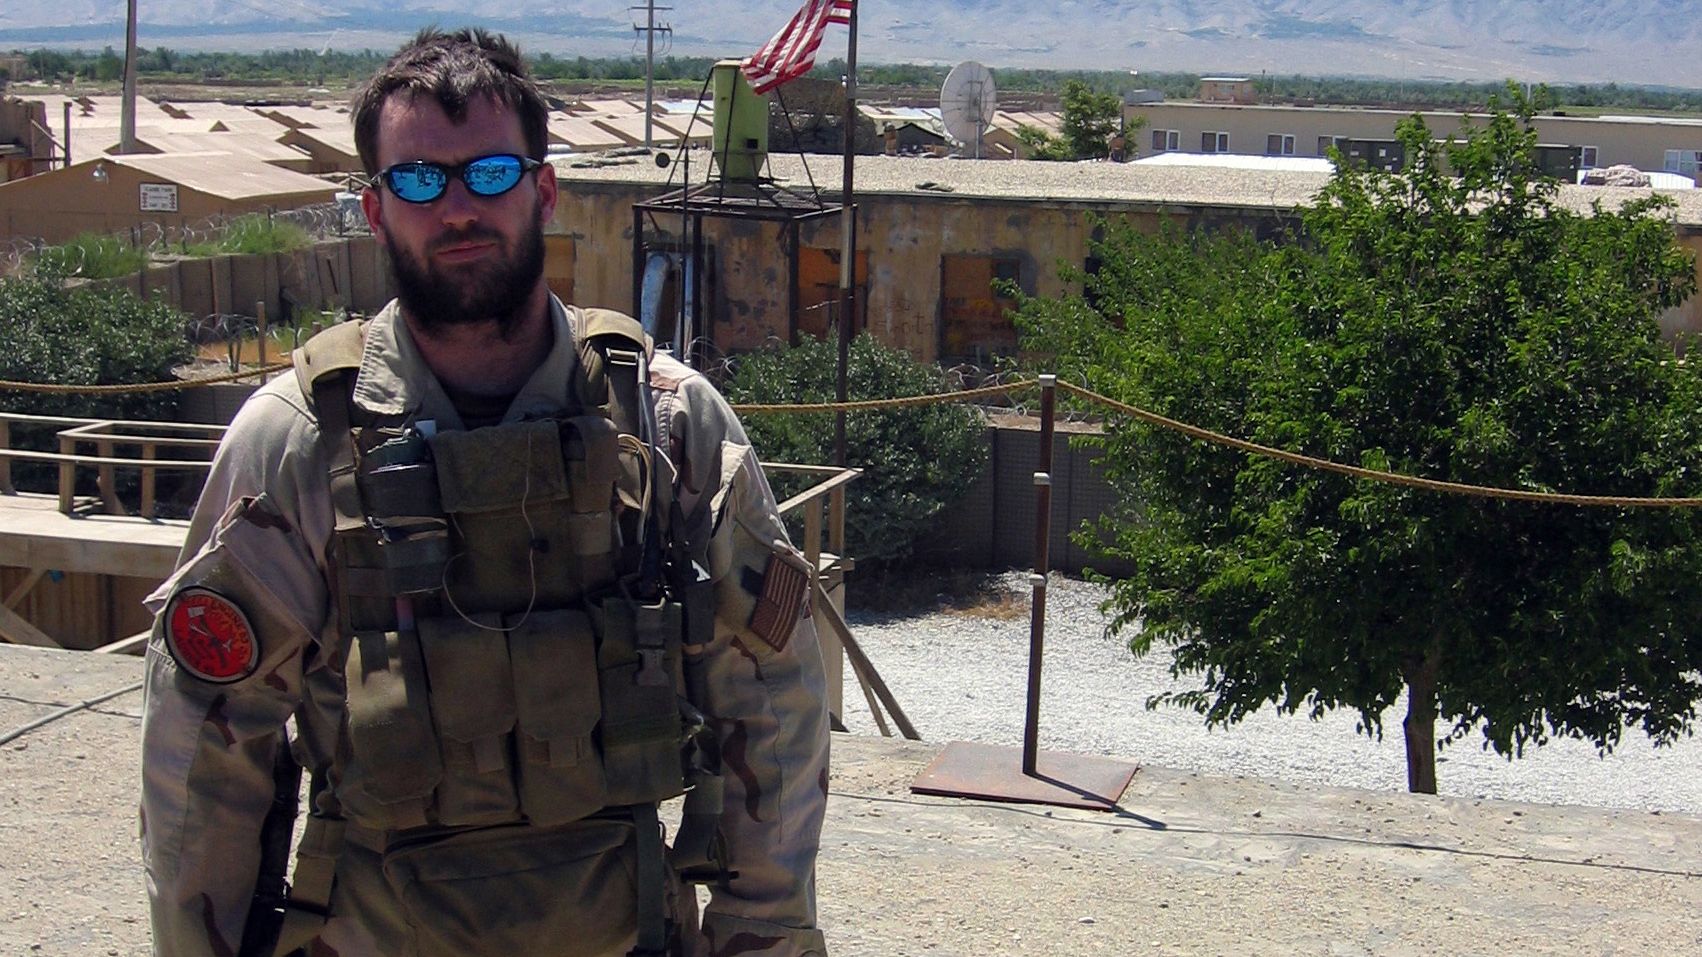 Lt. Michael P. Murphy in whose memory the challenge was created